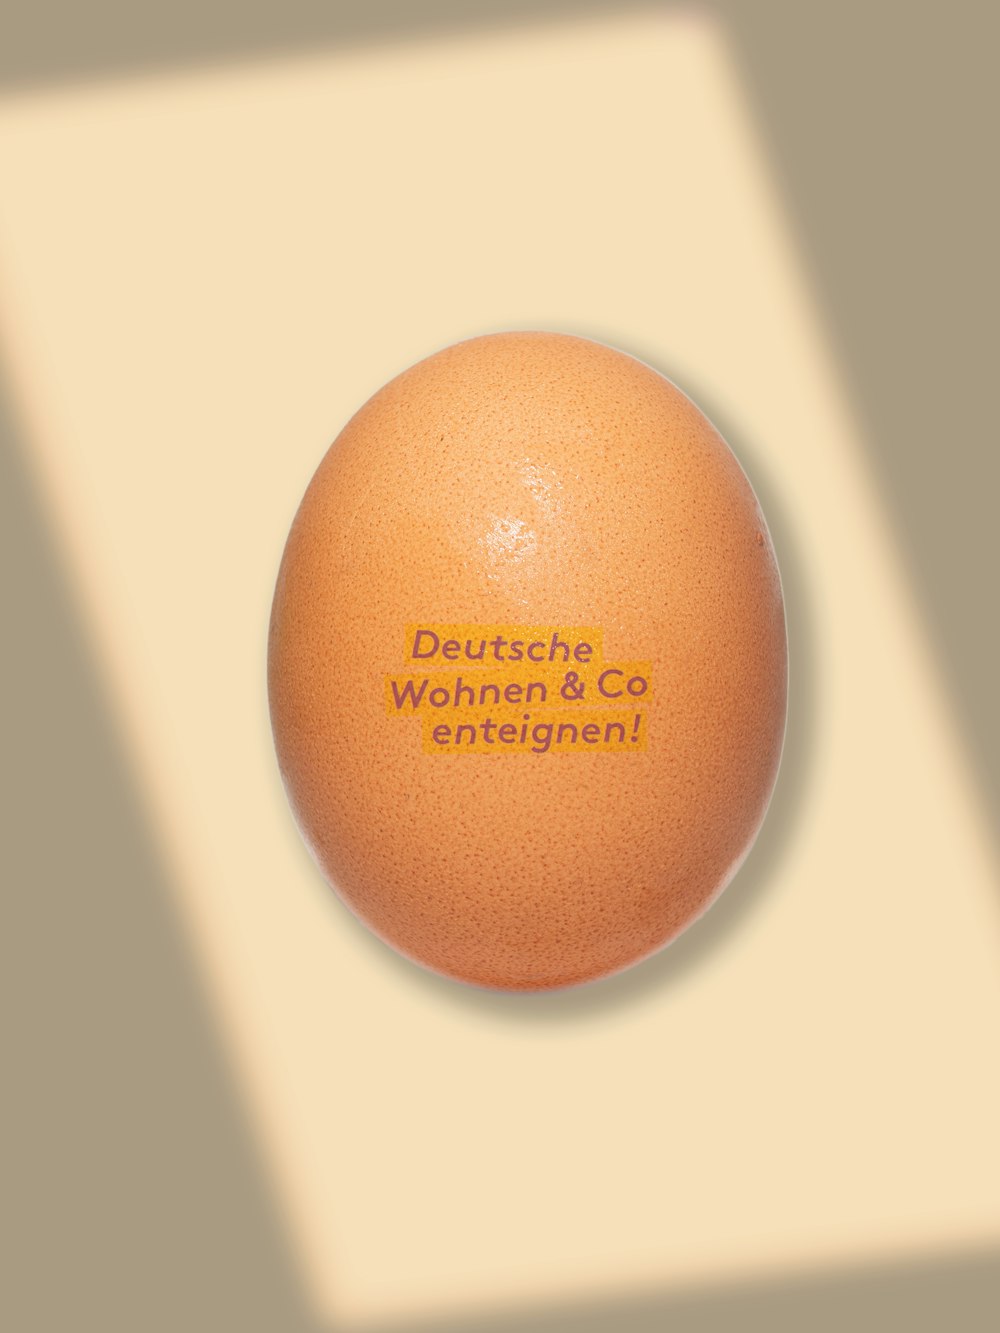 a brown egg on a white surface